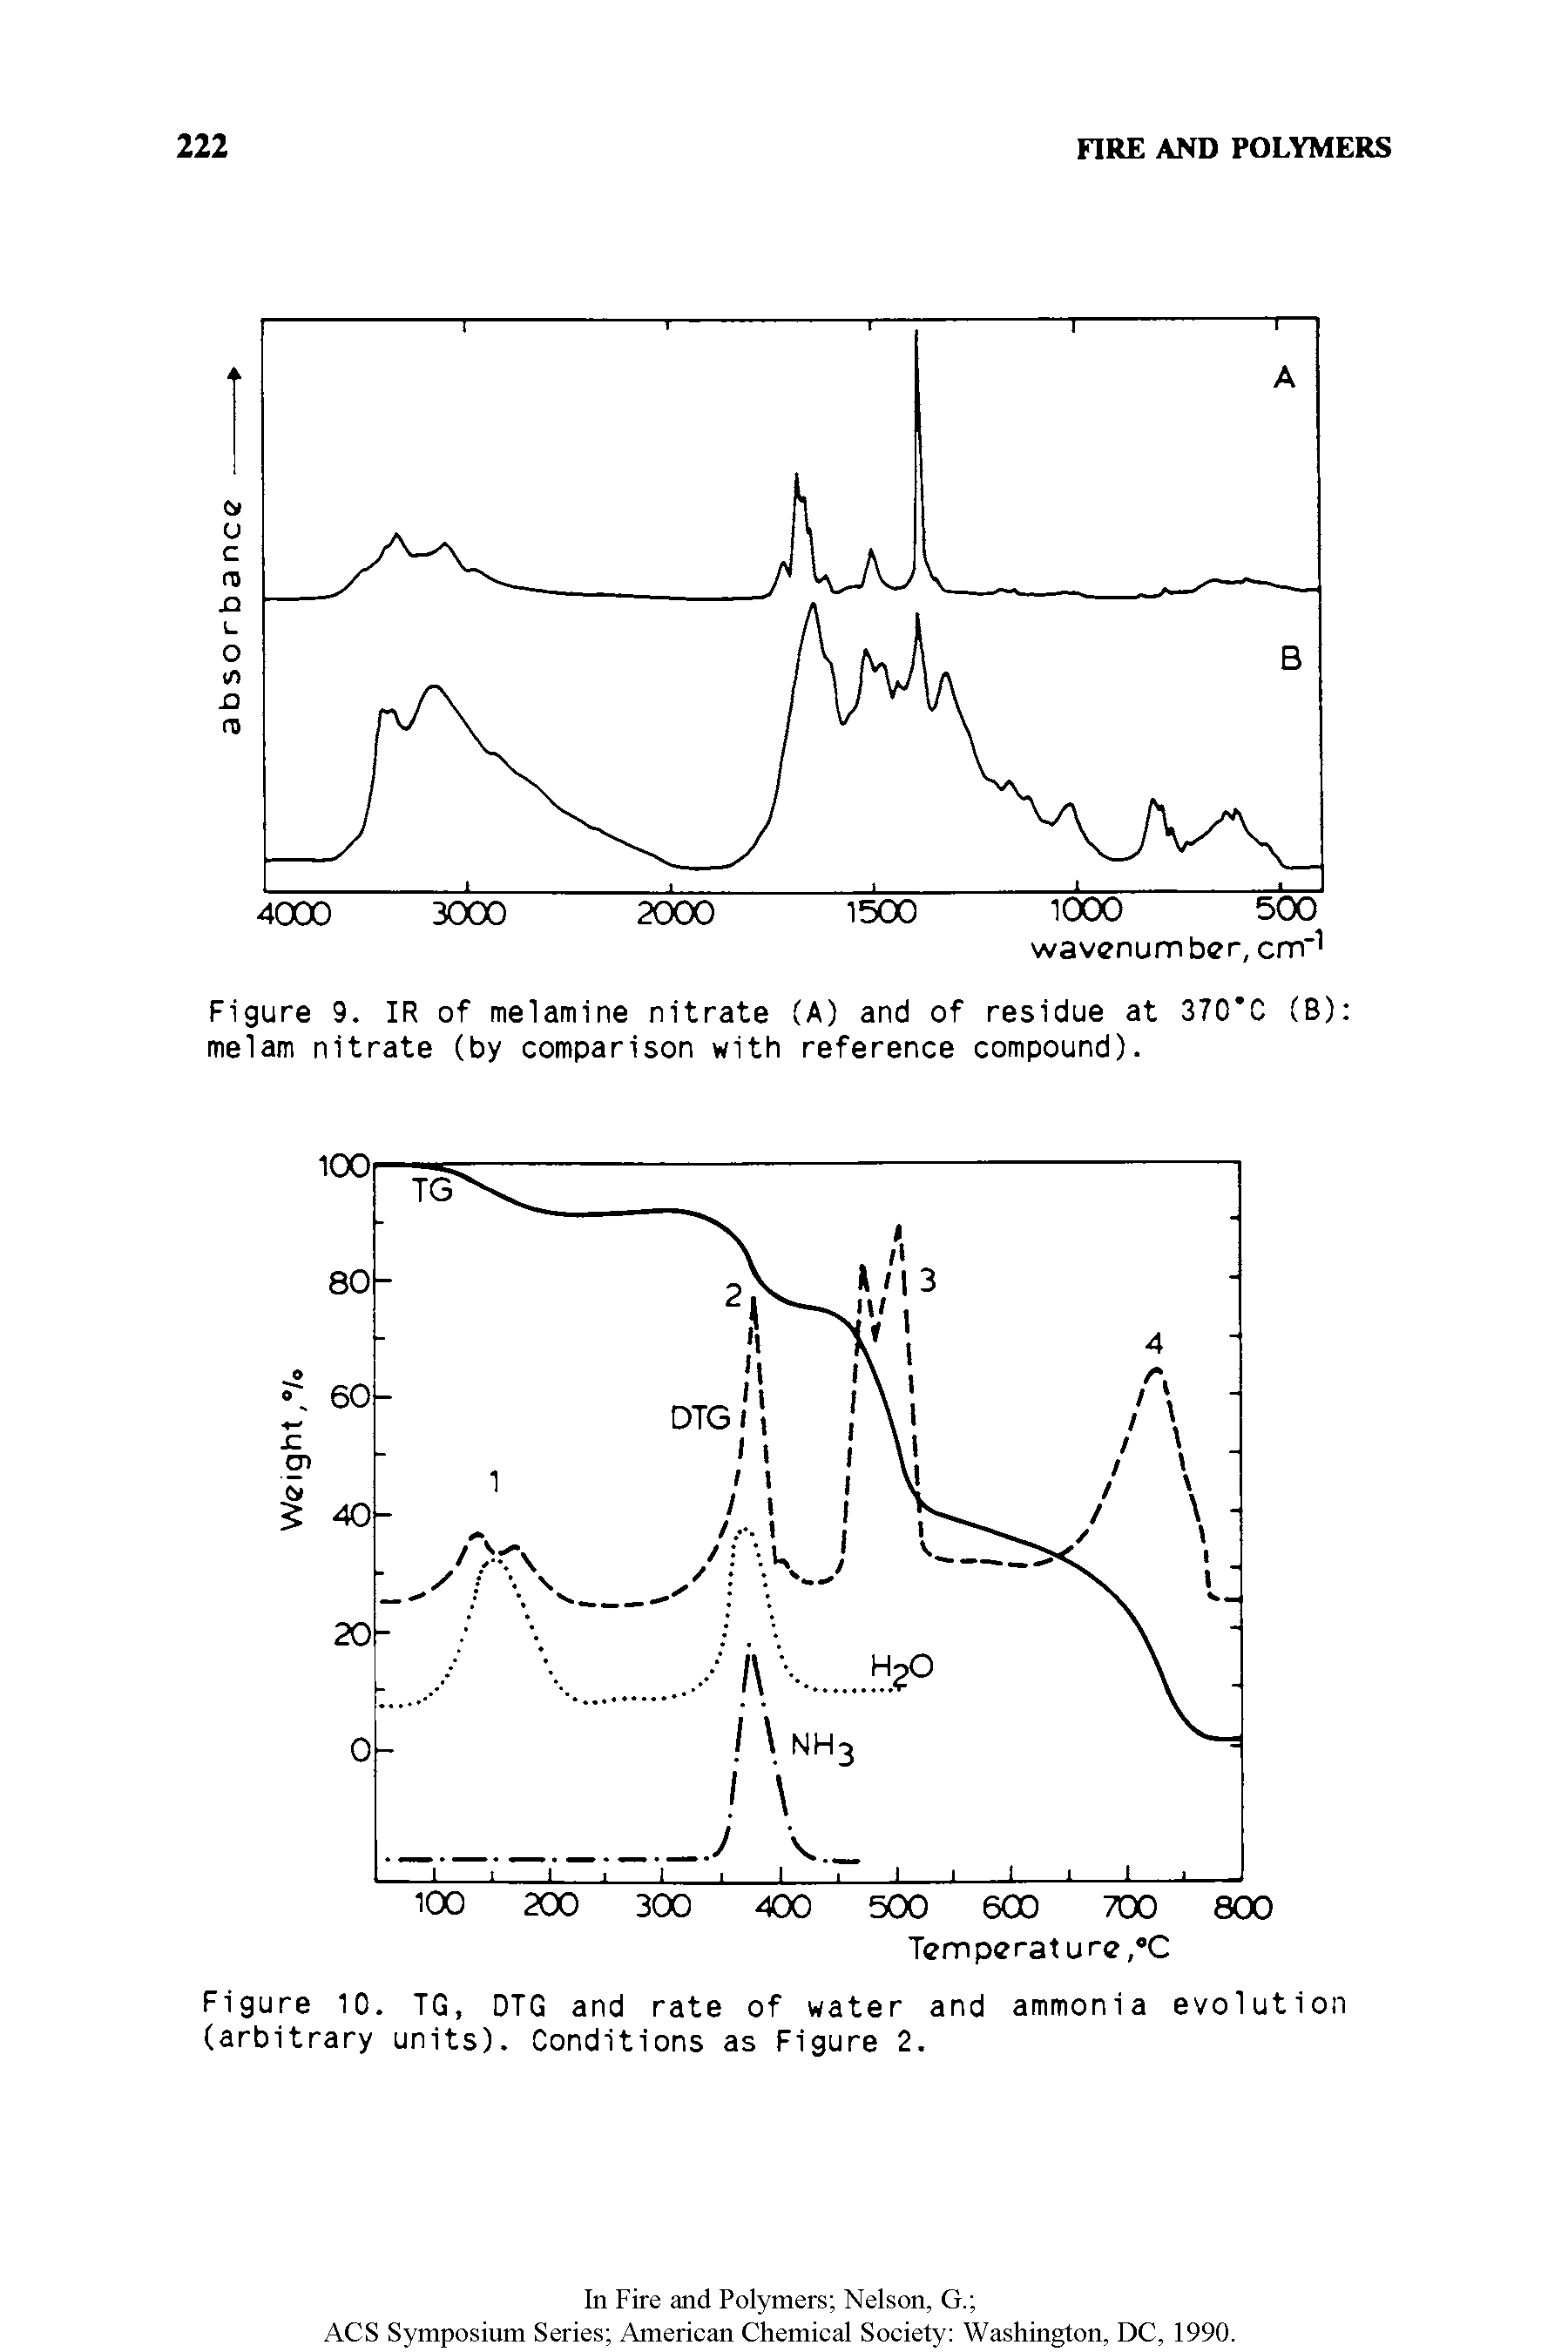 Figure 9. IR of melamine nitrate (A) and of residue at 370 C (B) melam nitrate (by comparison with reference compound).